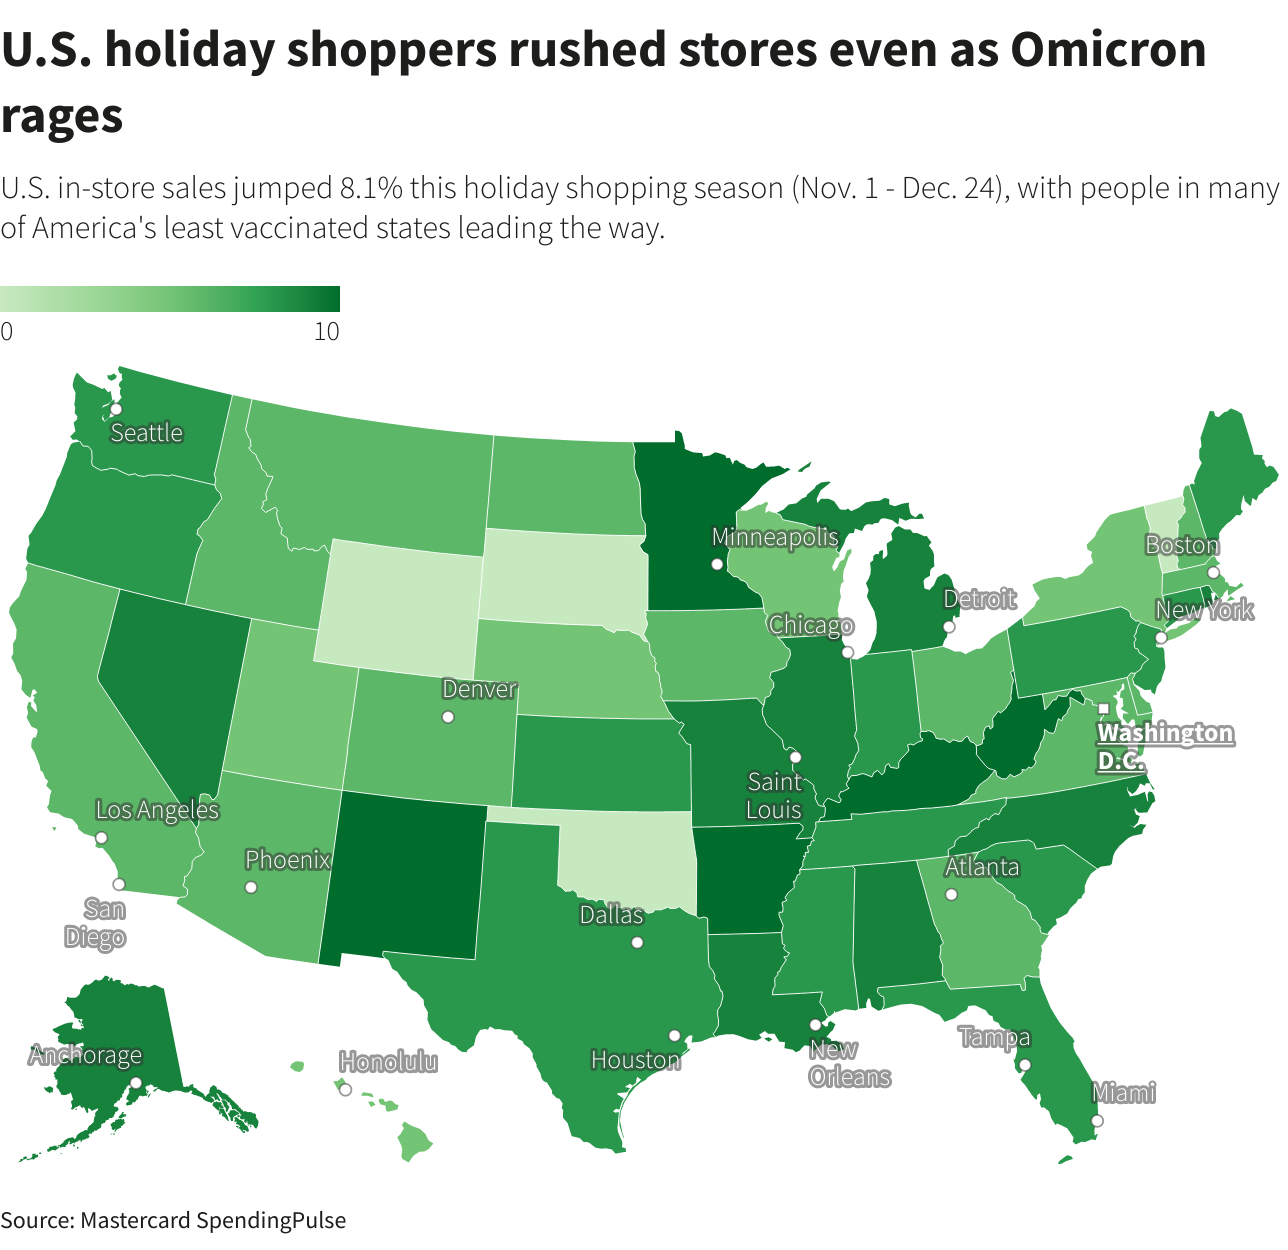 U.S. holiday shoppers rushed stores even as Omicron rages U.S. holiday shoppers rushed stores even as Omicron rages